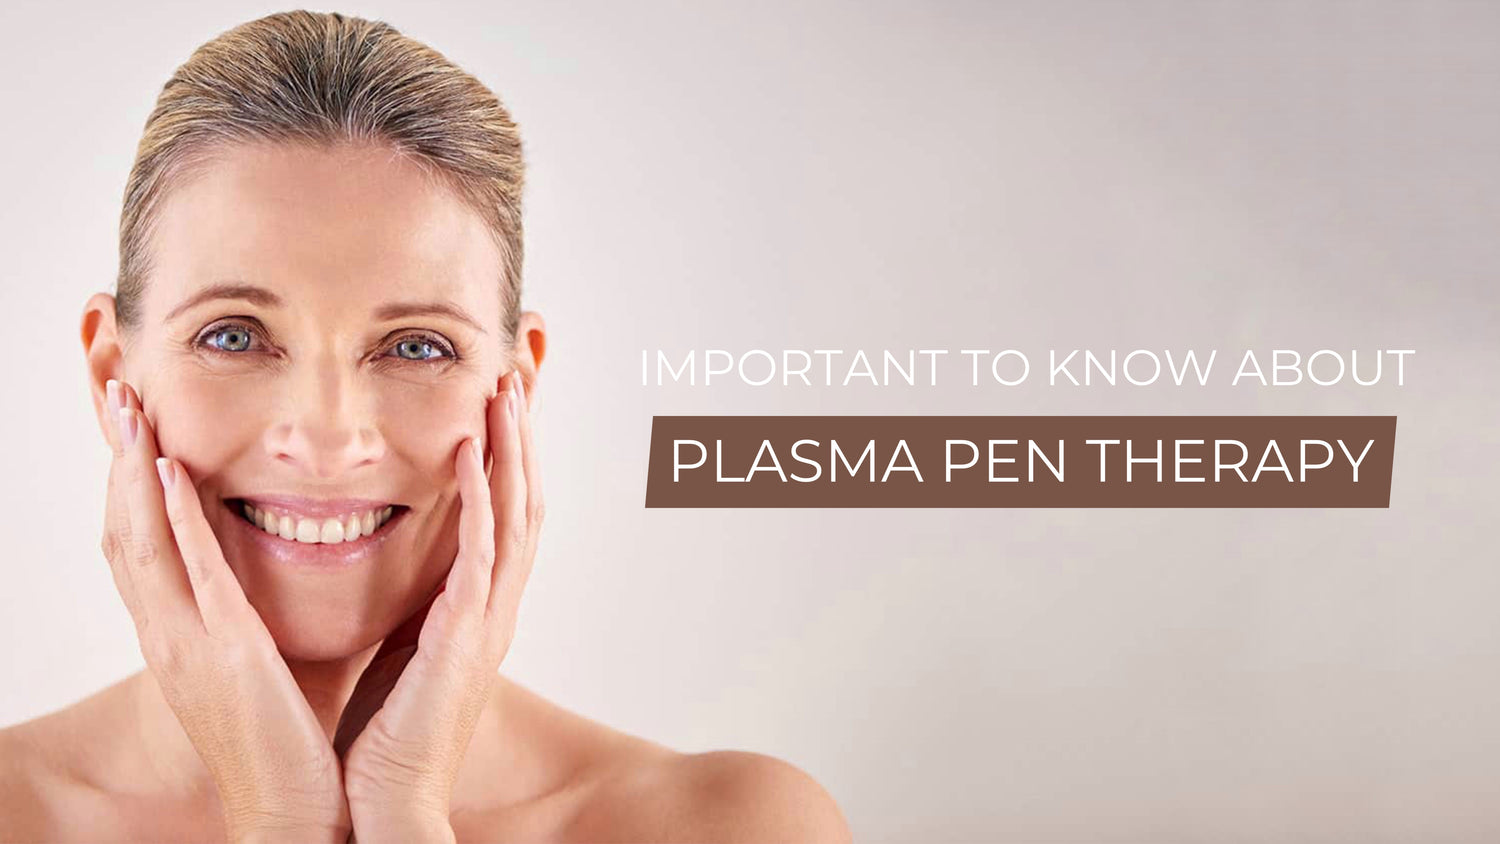 Important to know about Plasma pen therapy